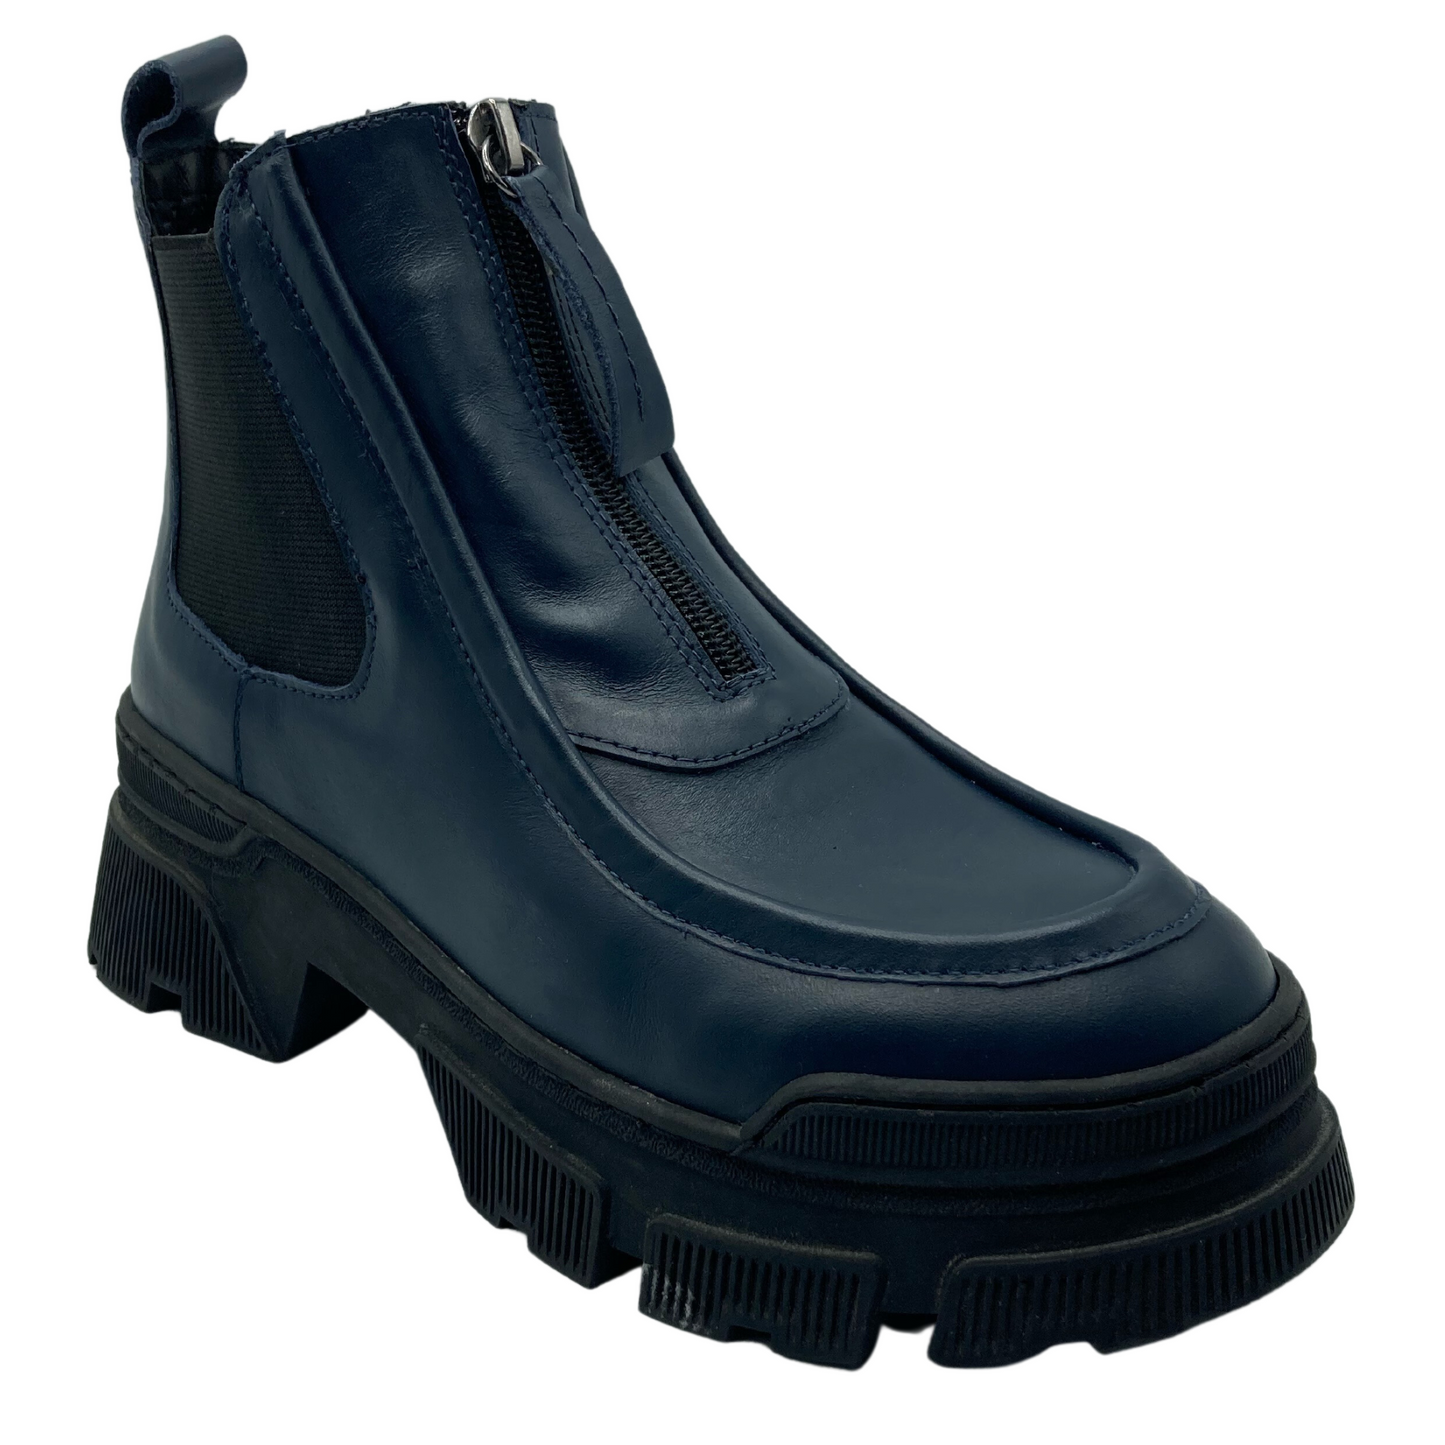 45 degree angled view of navy leather short boot with lug black rubber sole, elastic side gore and upper zipper